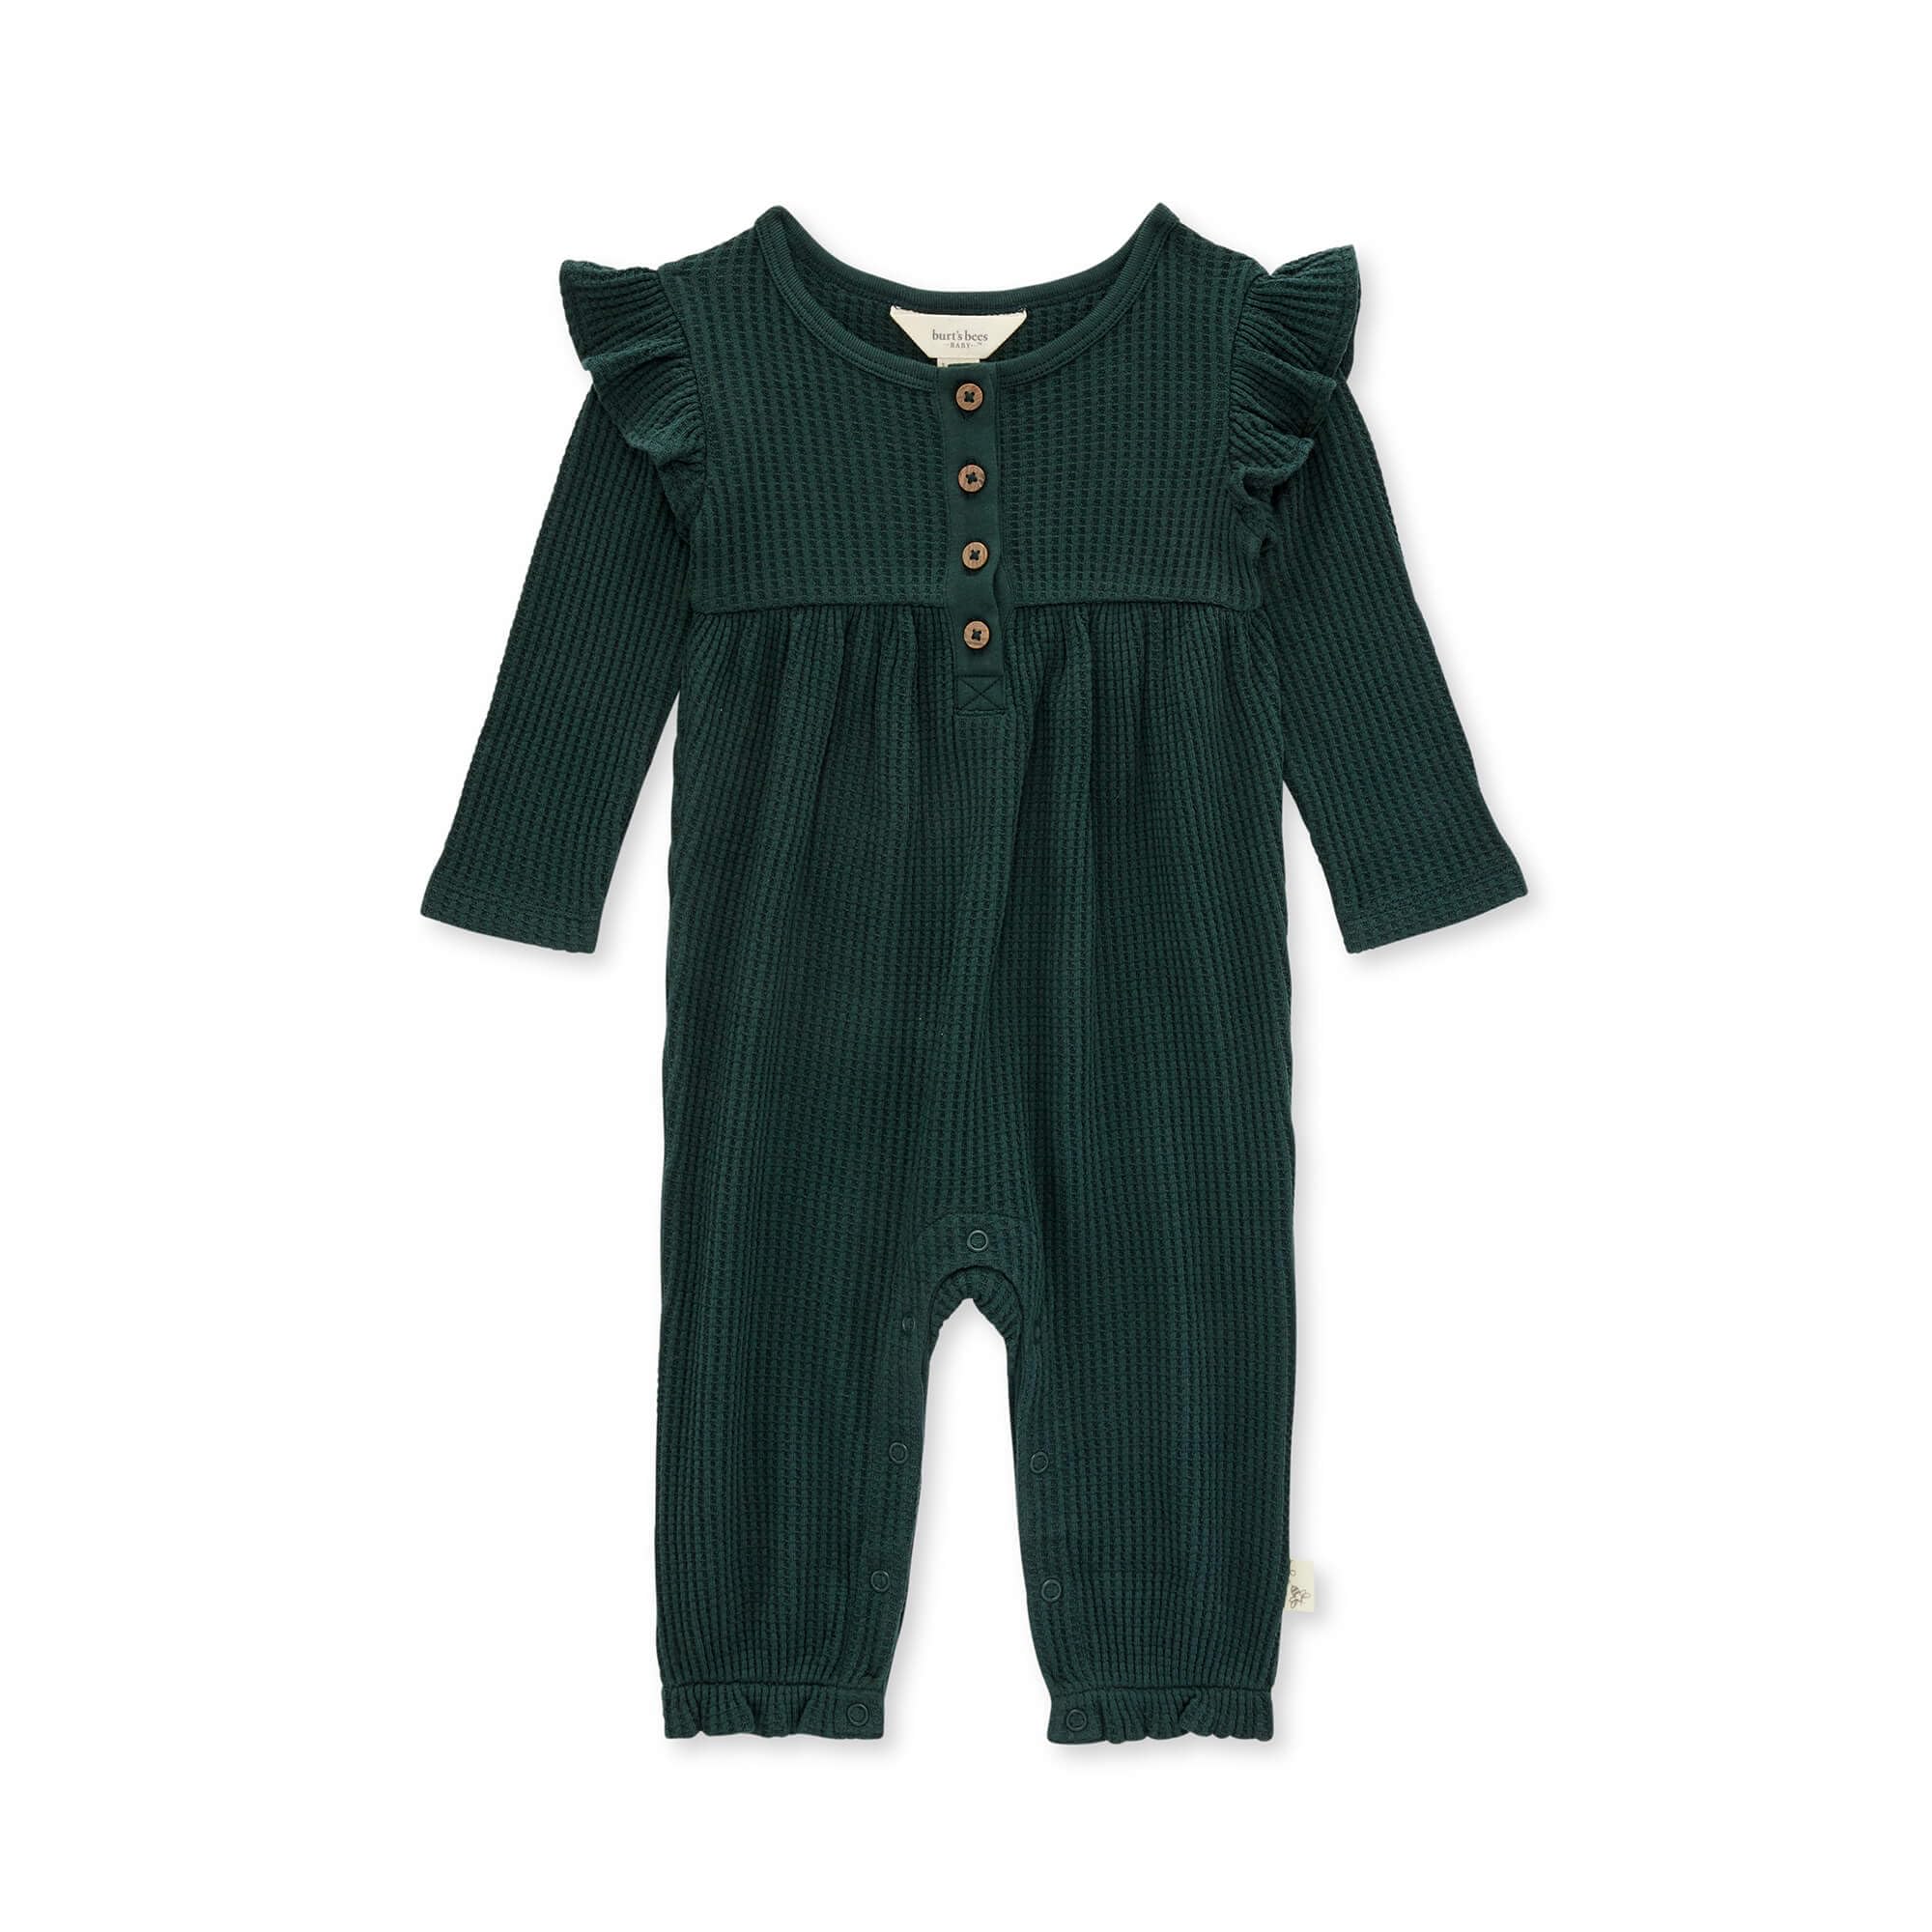 Burt's Bees Baby baby-girls Romper Jumpsuit, 100% Organic Cotton One-piece Outfit Coverall